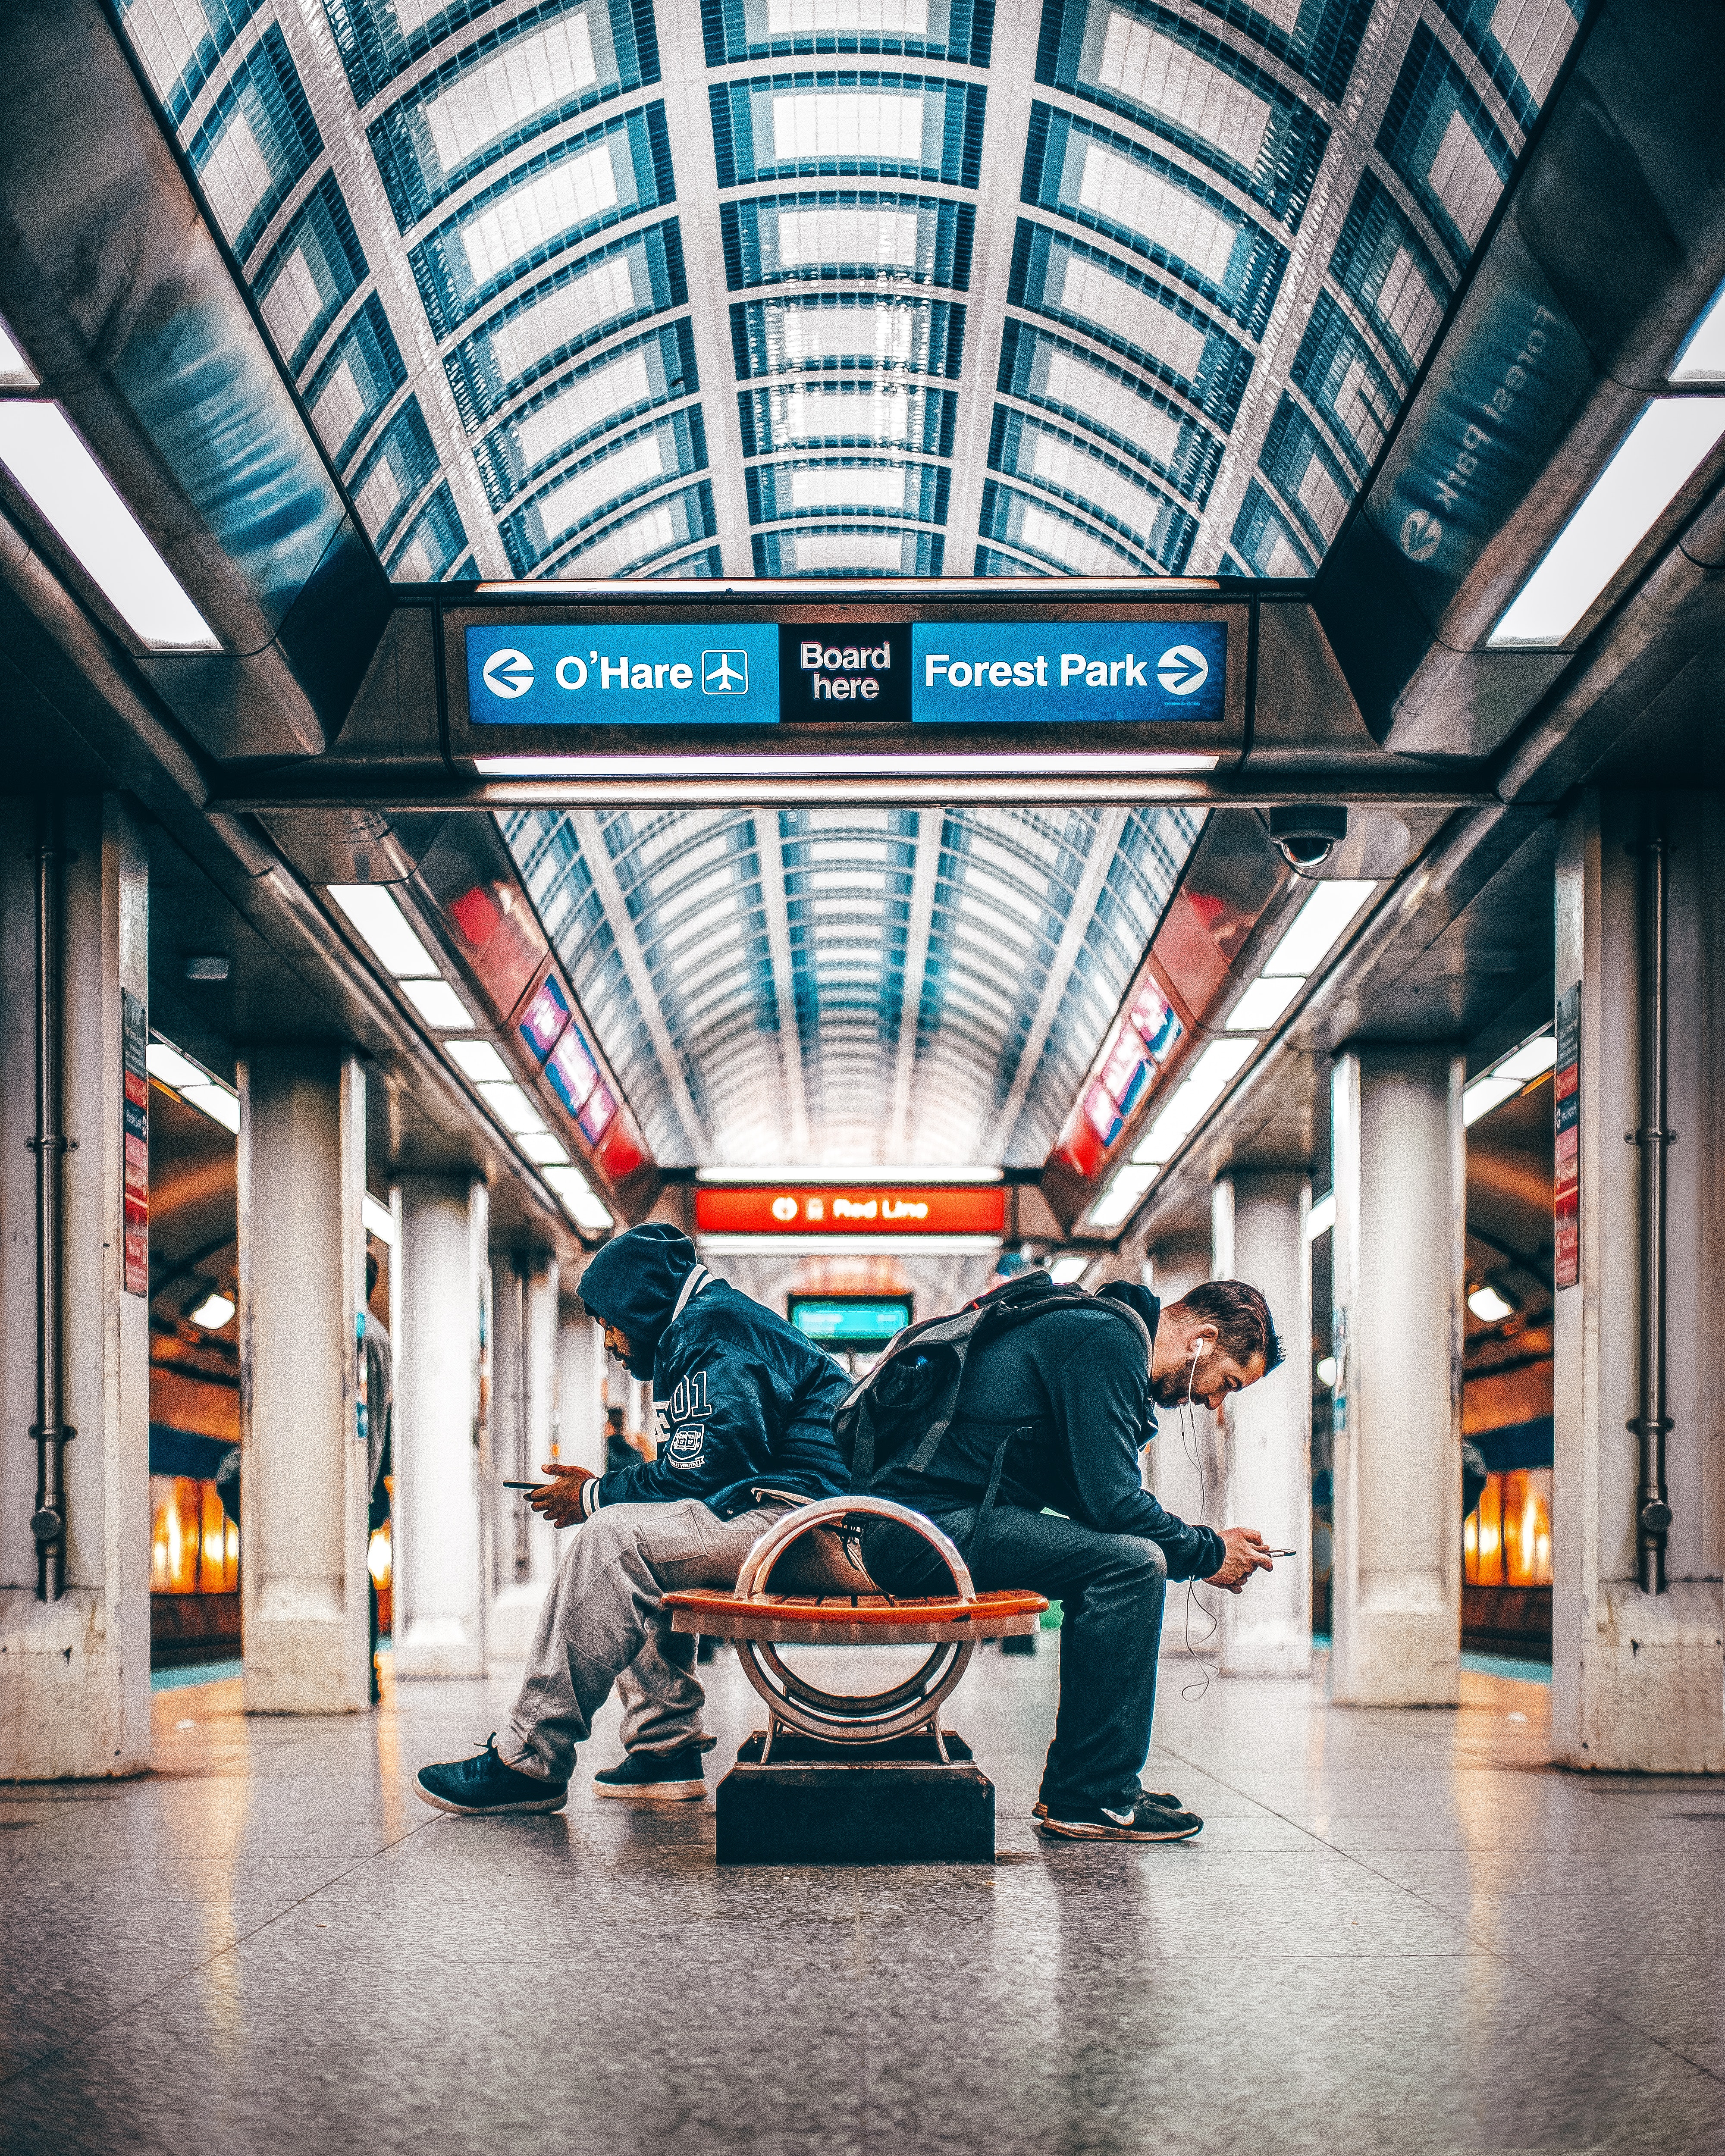 Two men sitting on a bench inside a station